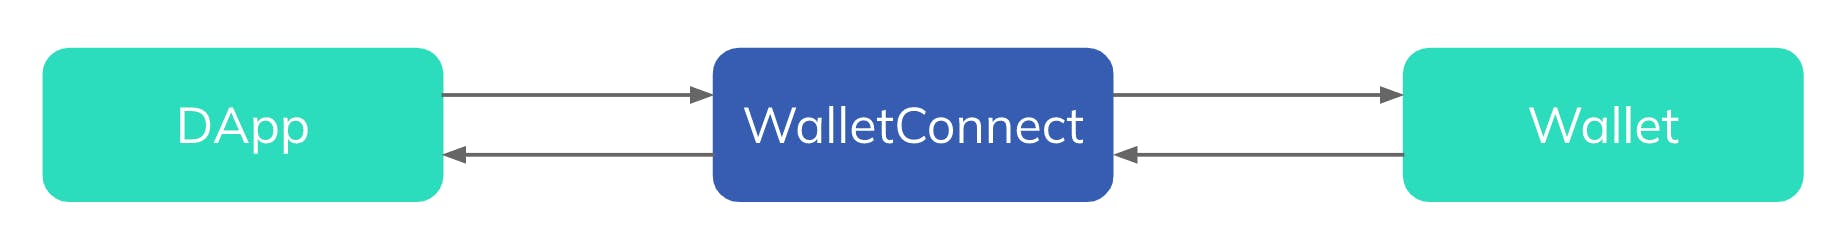 WalletConnect acts as a middleman between the DApp and the user's wallet.